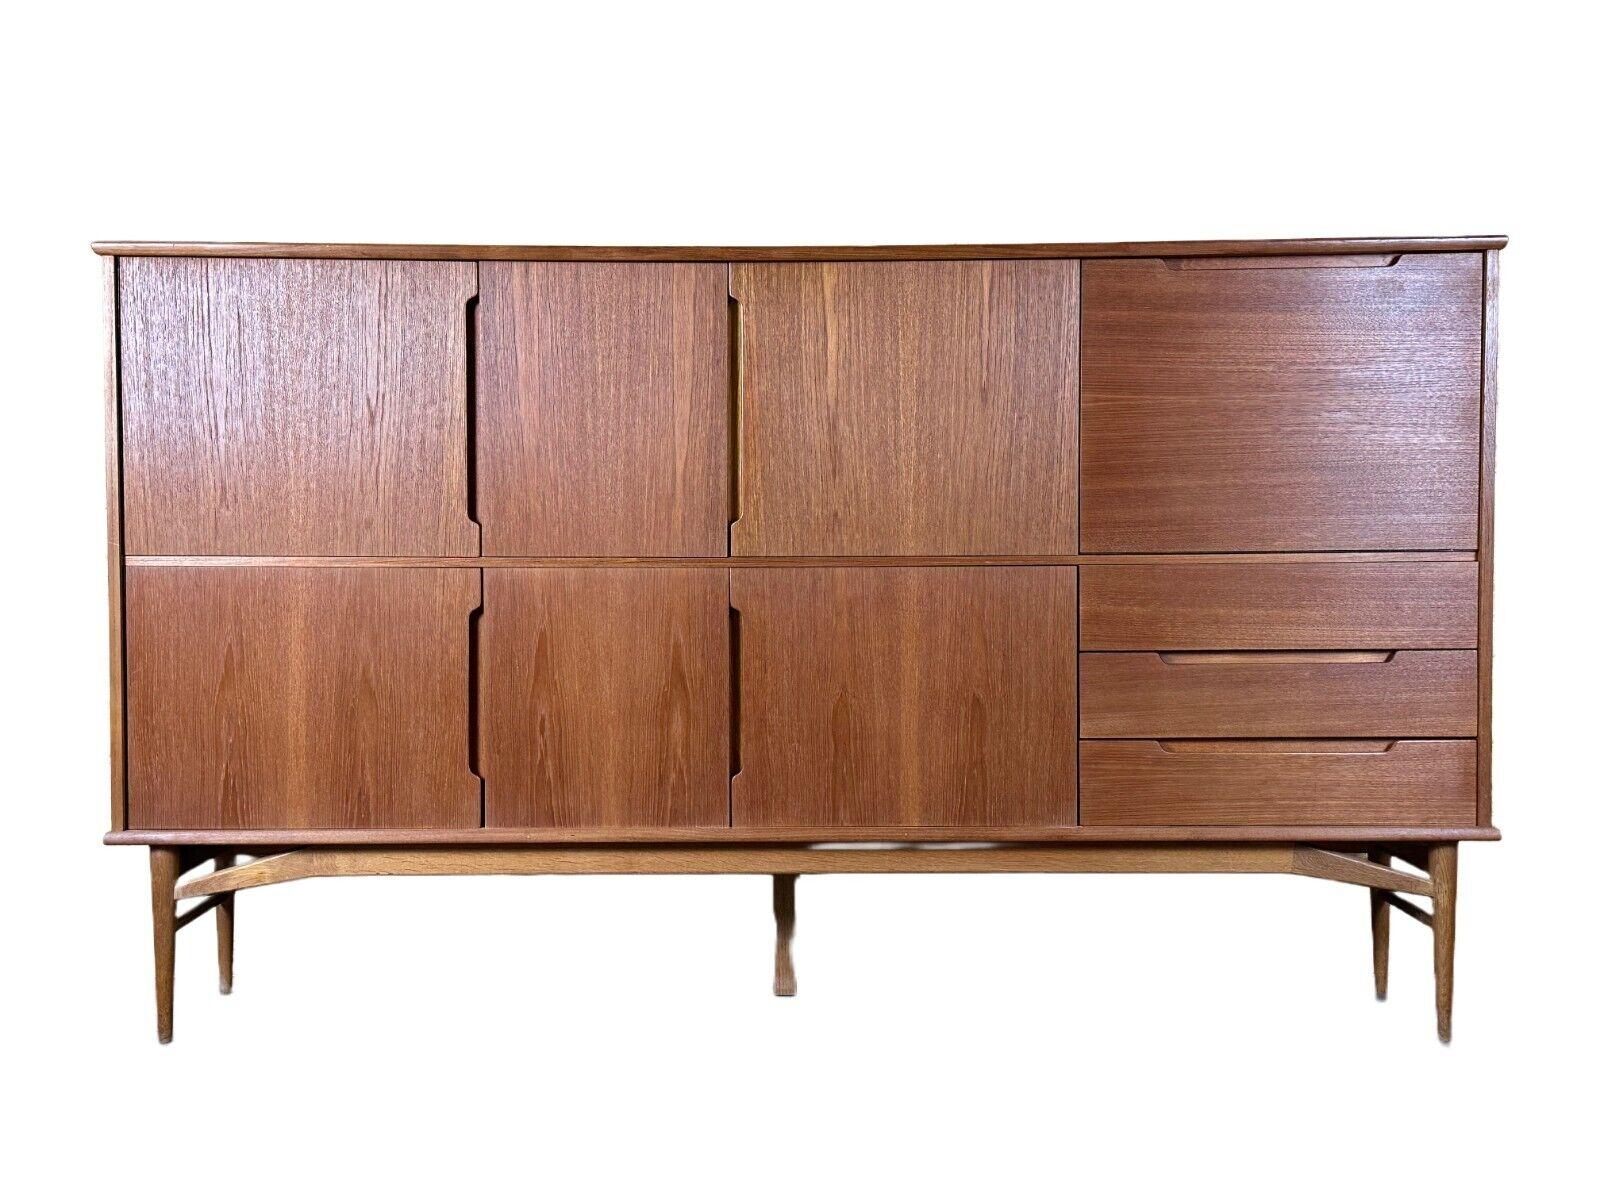 60s 70s teak sideboard highboard model Fredericia Danish Modern Design

Object: sideboard

Manufacturer:

Condition: good

Age: around 1960-1970

Dimensions:

Width = 230cm
Depth = 43.5cm
Height = 132.5cm

Material: teak

Other notes:

The pictures